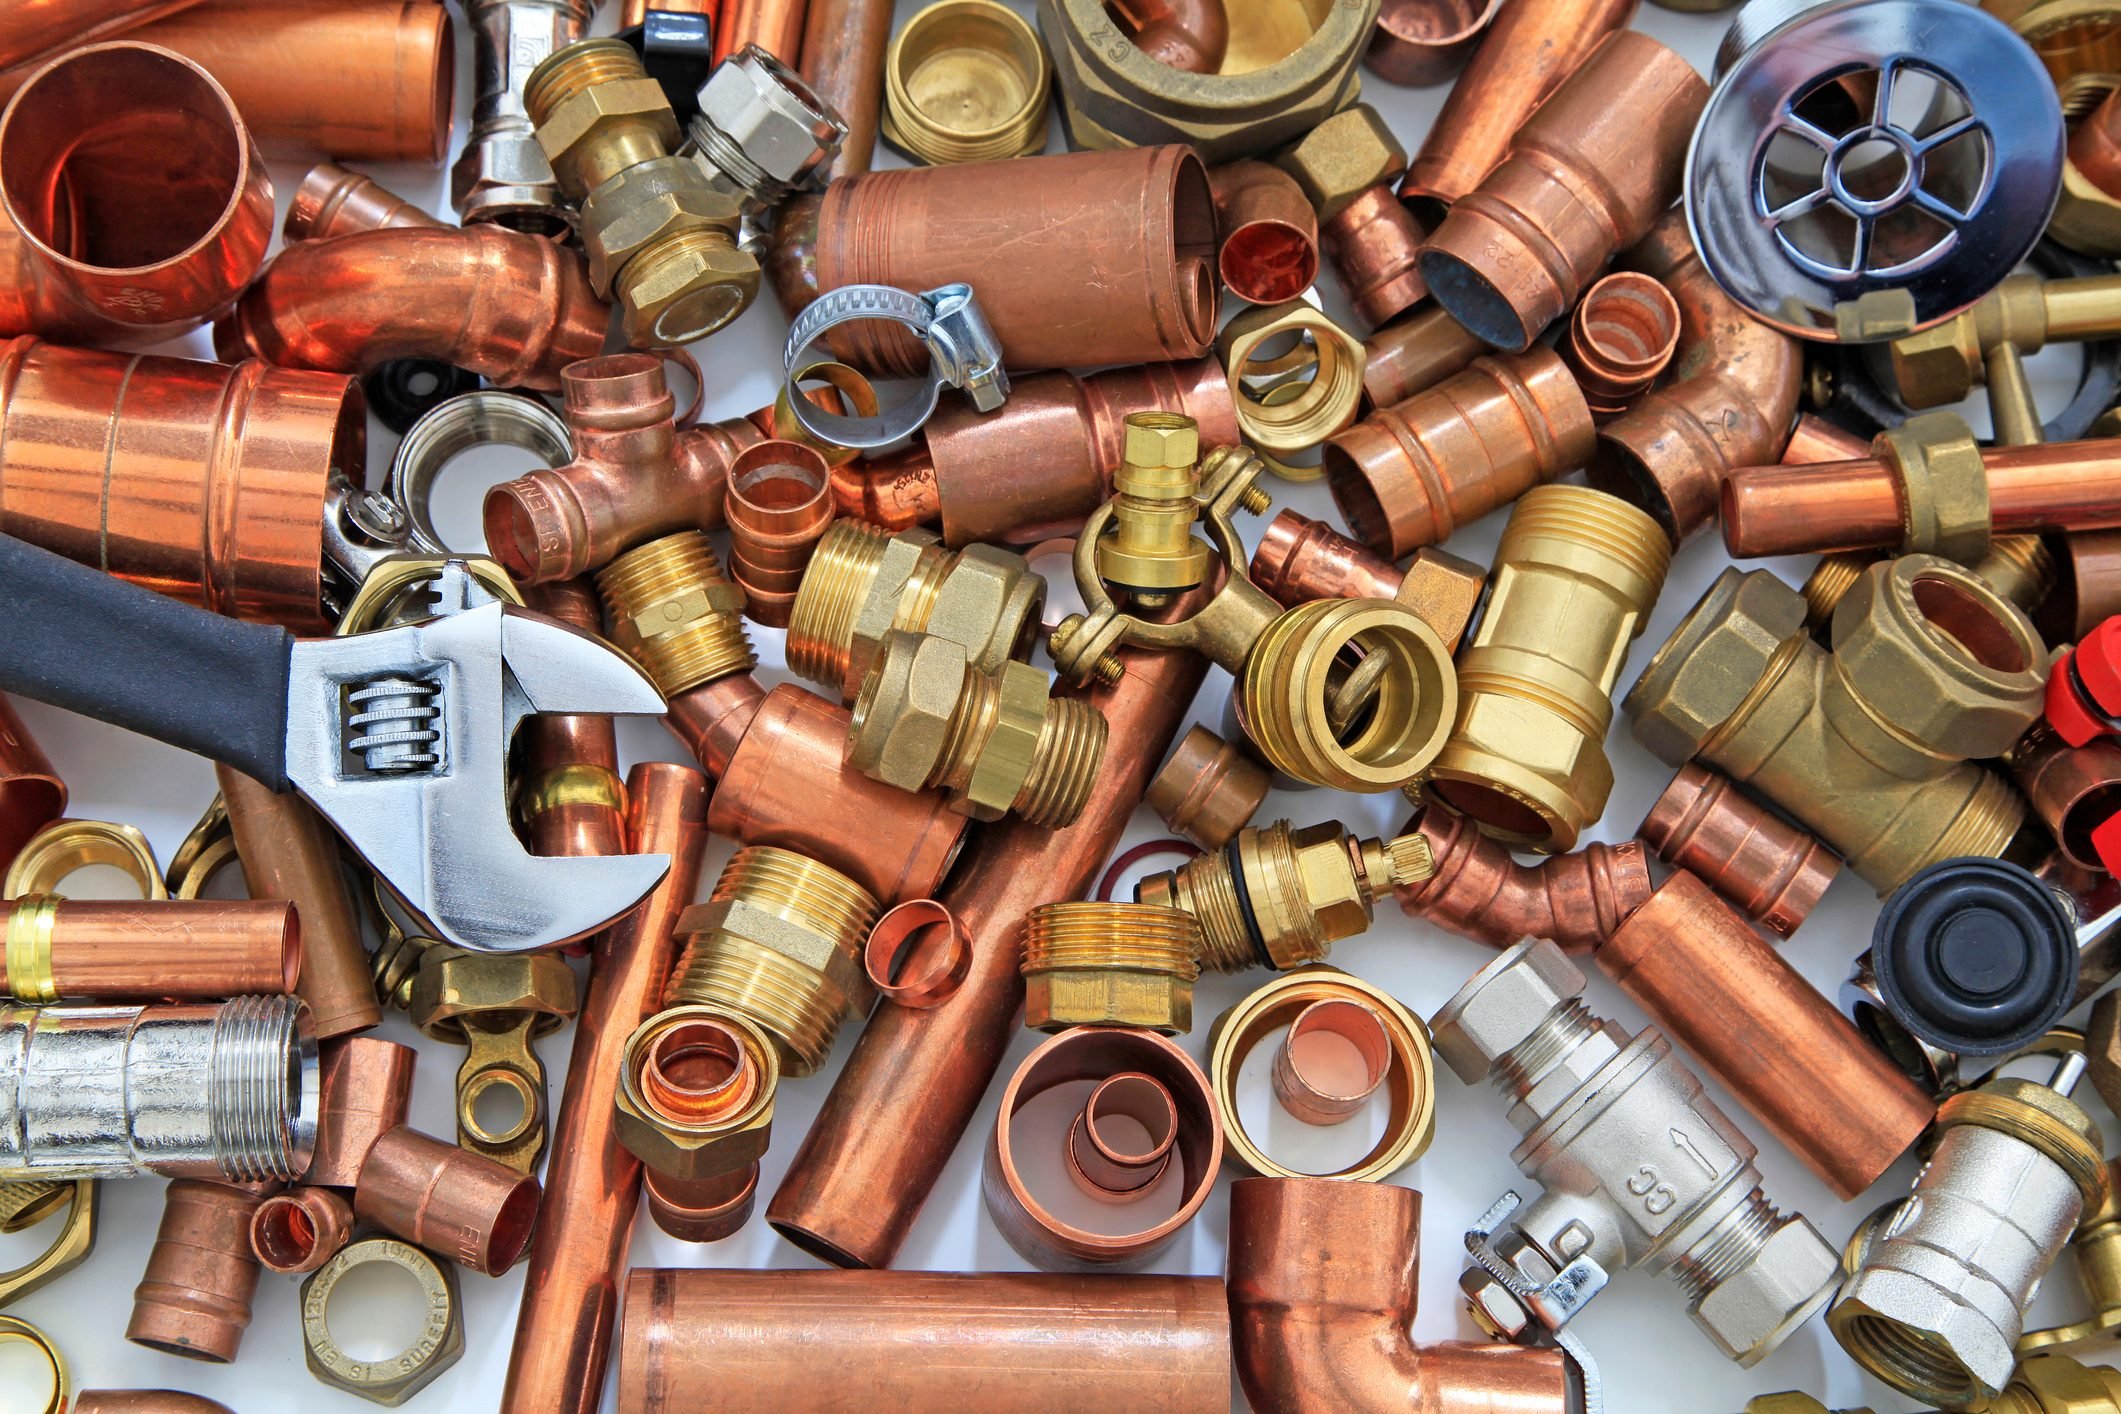 A Guide To Pipe Fittings and How To Use Them